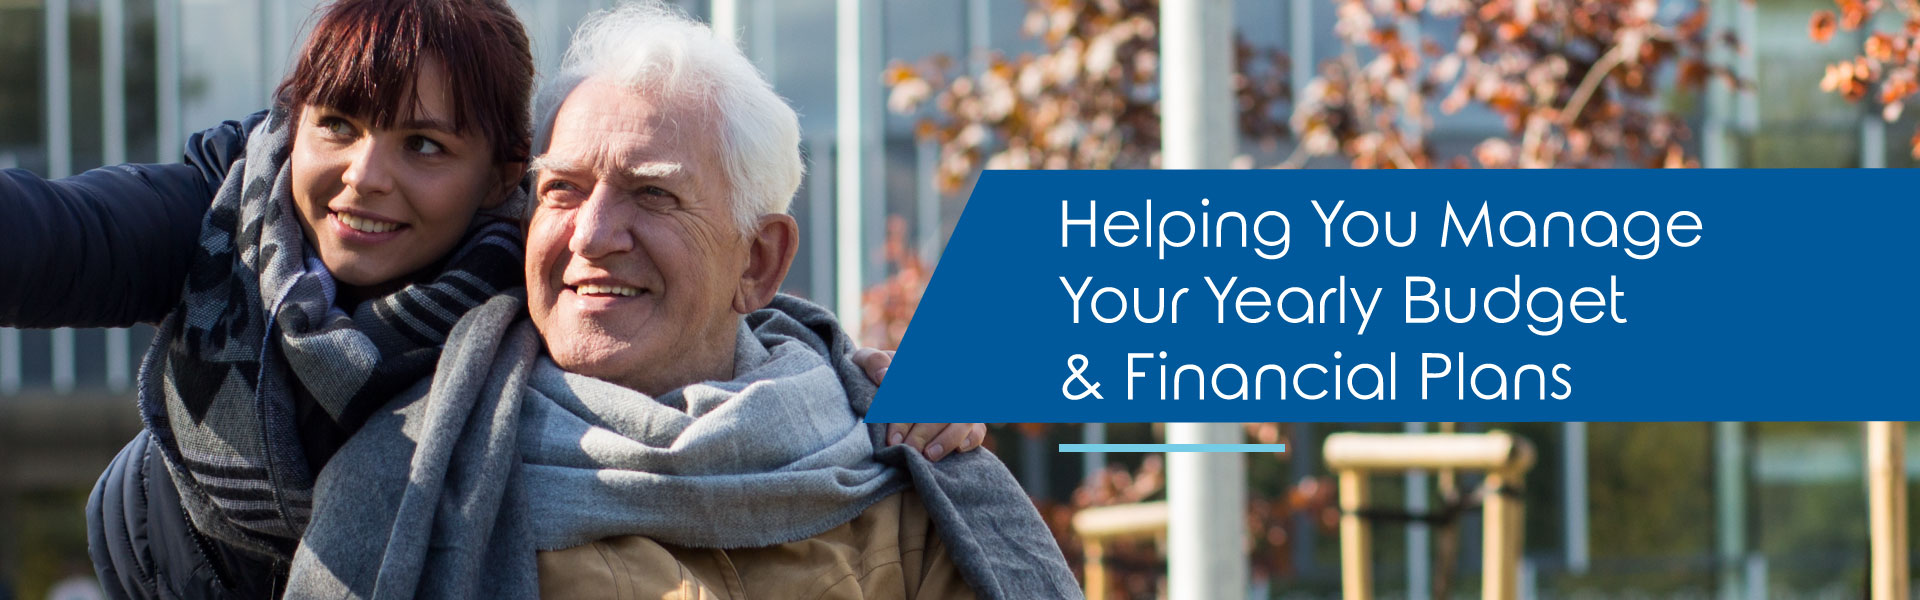 Helping you manage your yearly budget and financial plans